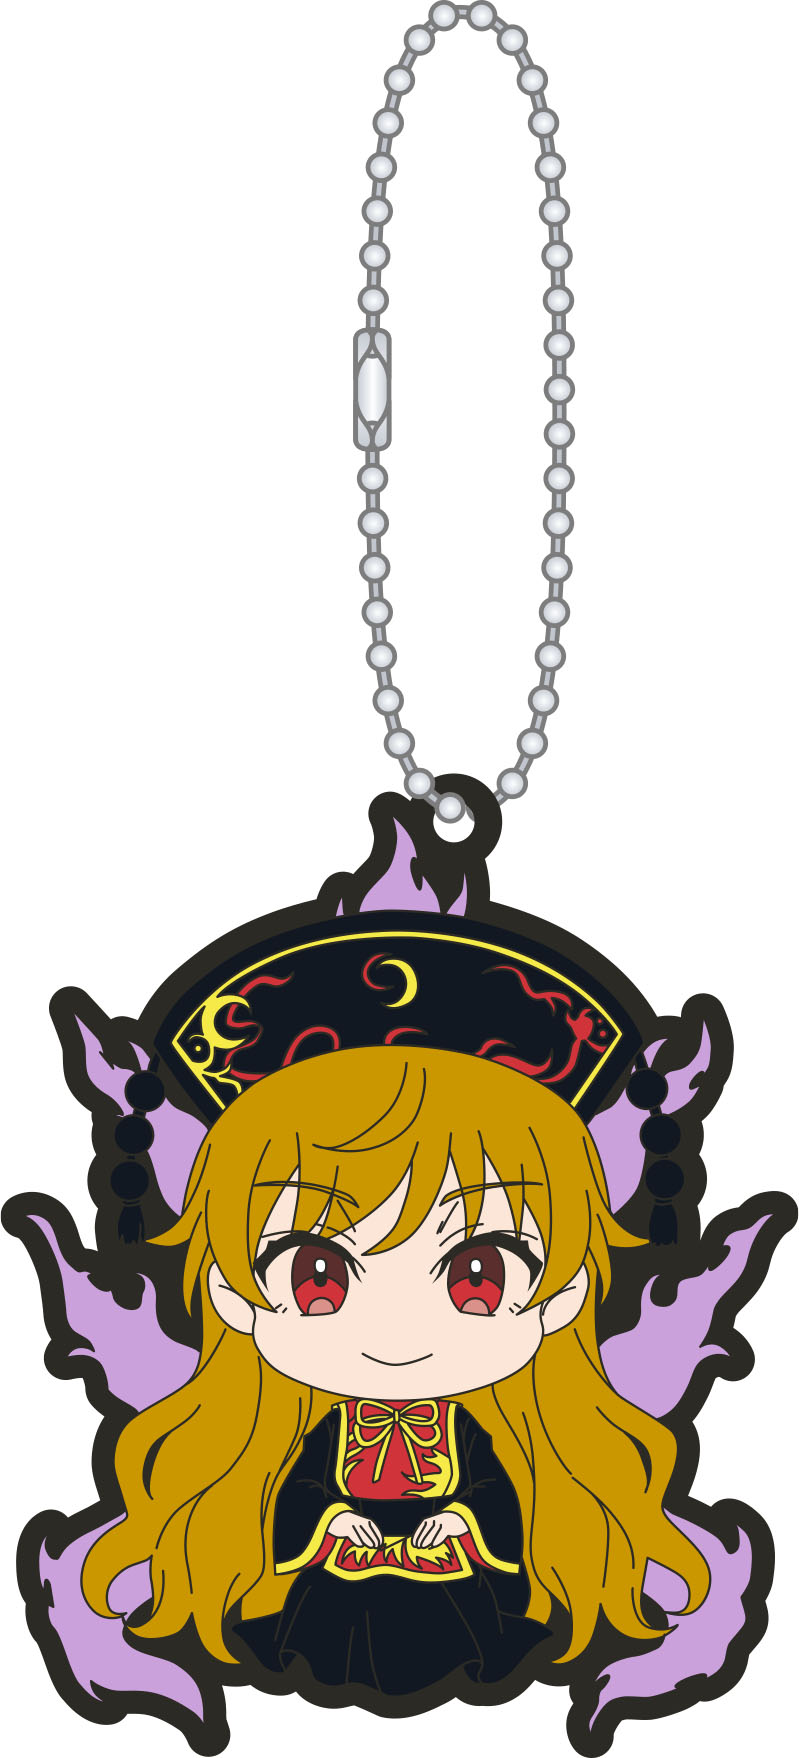 Touhou Project Movic Rubber Key Chain Collection Dec2023 (1 Random)